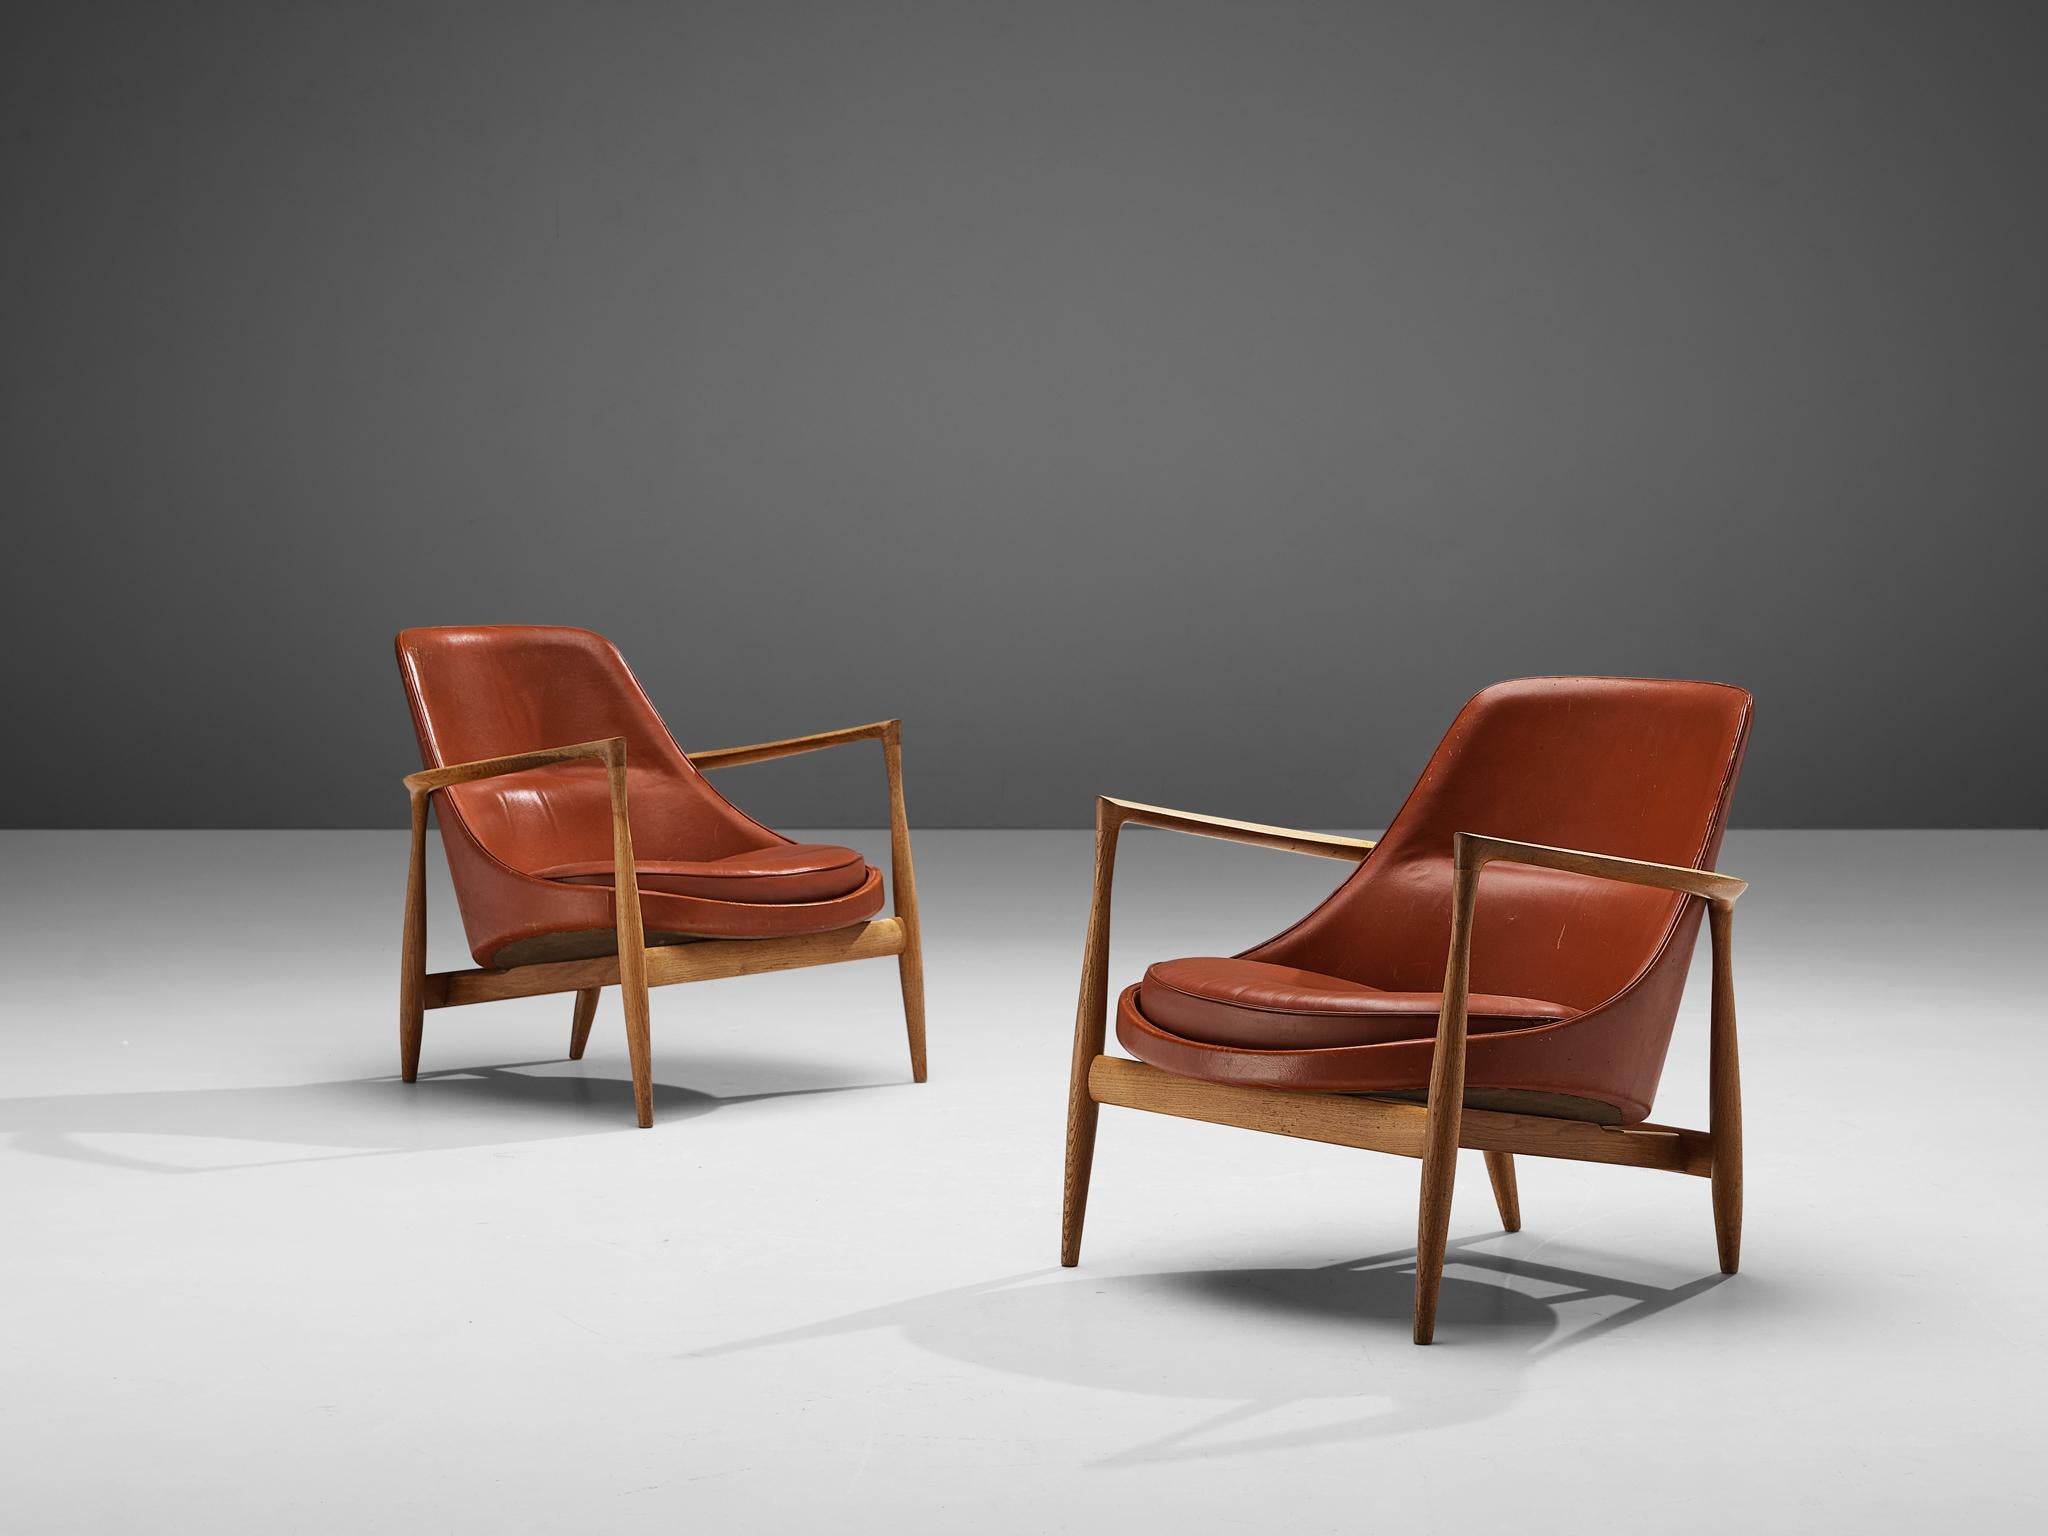 Ib Kofod-Larsen, lounge chairs model U-56 'Elizabeth', oak, red leather, Denmark, designed in 1956

A pair of armchairs designed by Ib Kofod-Larsen in 1956. These are Kofod-Larsen highest-quality chairs, with an oak frame and patinated red leather.